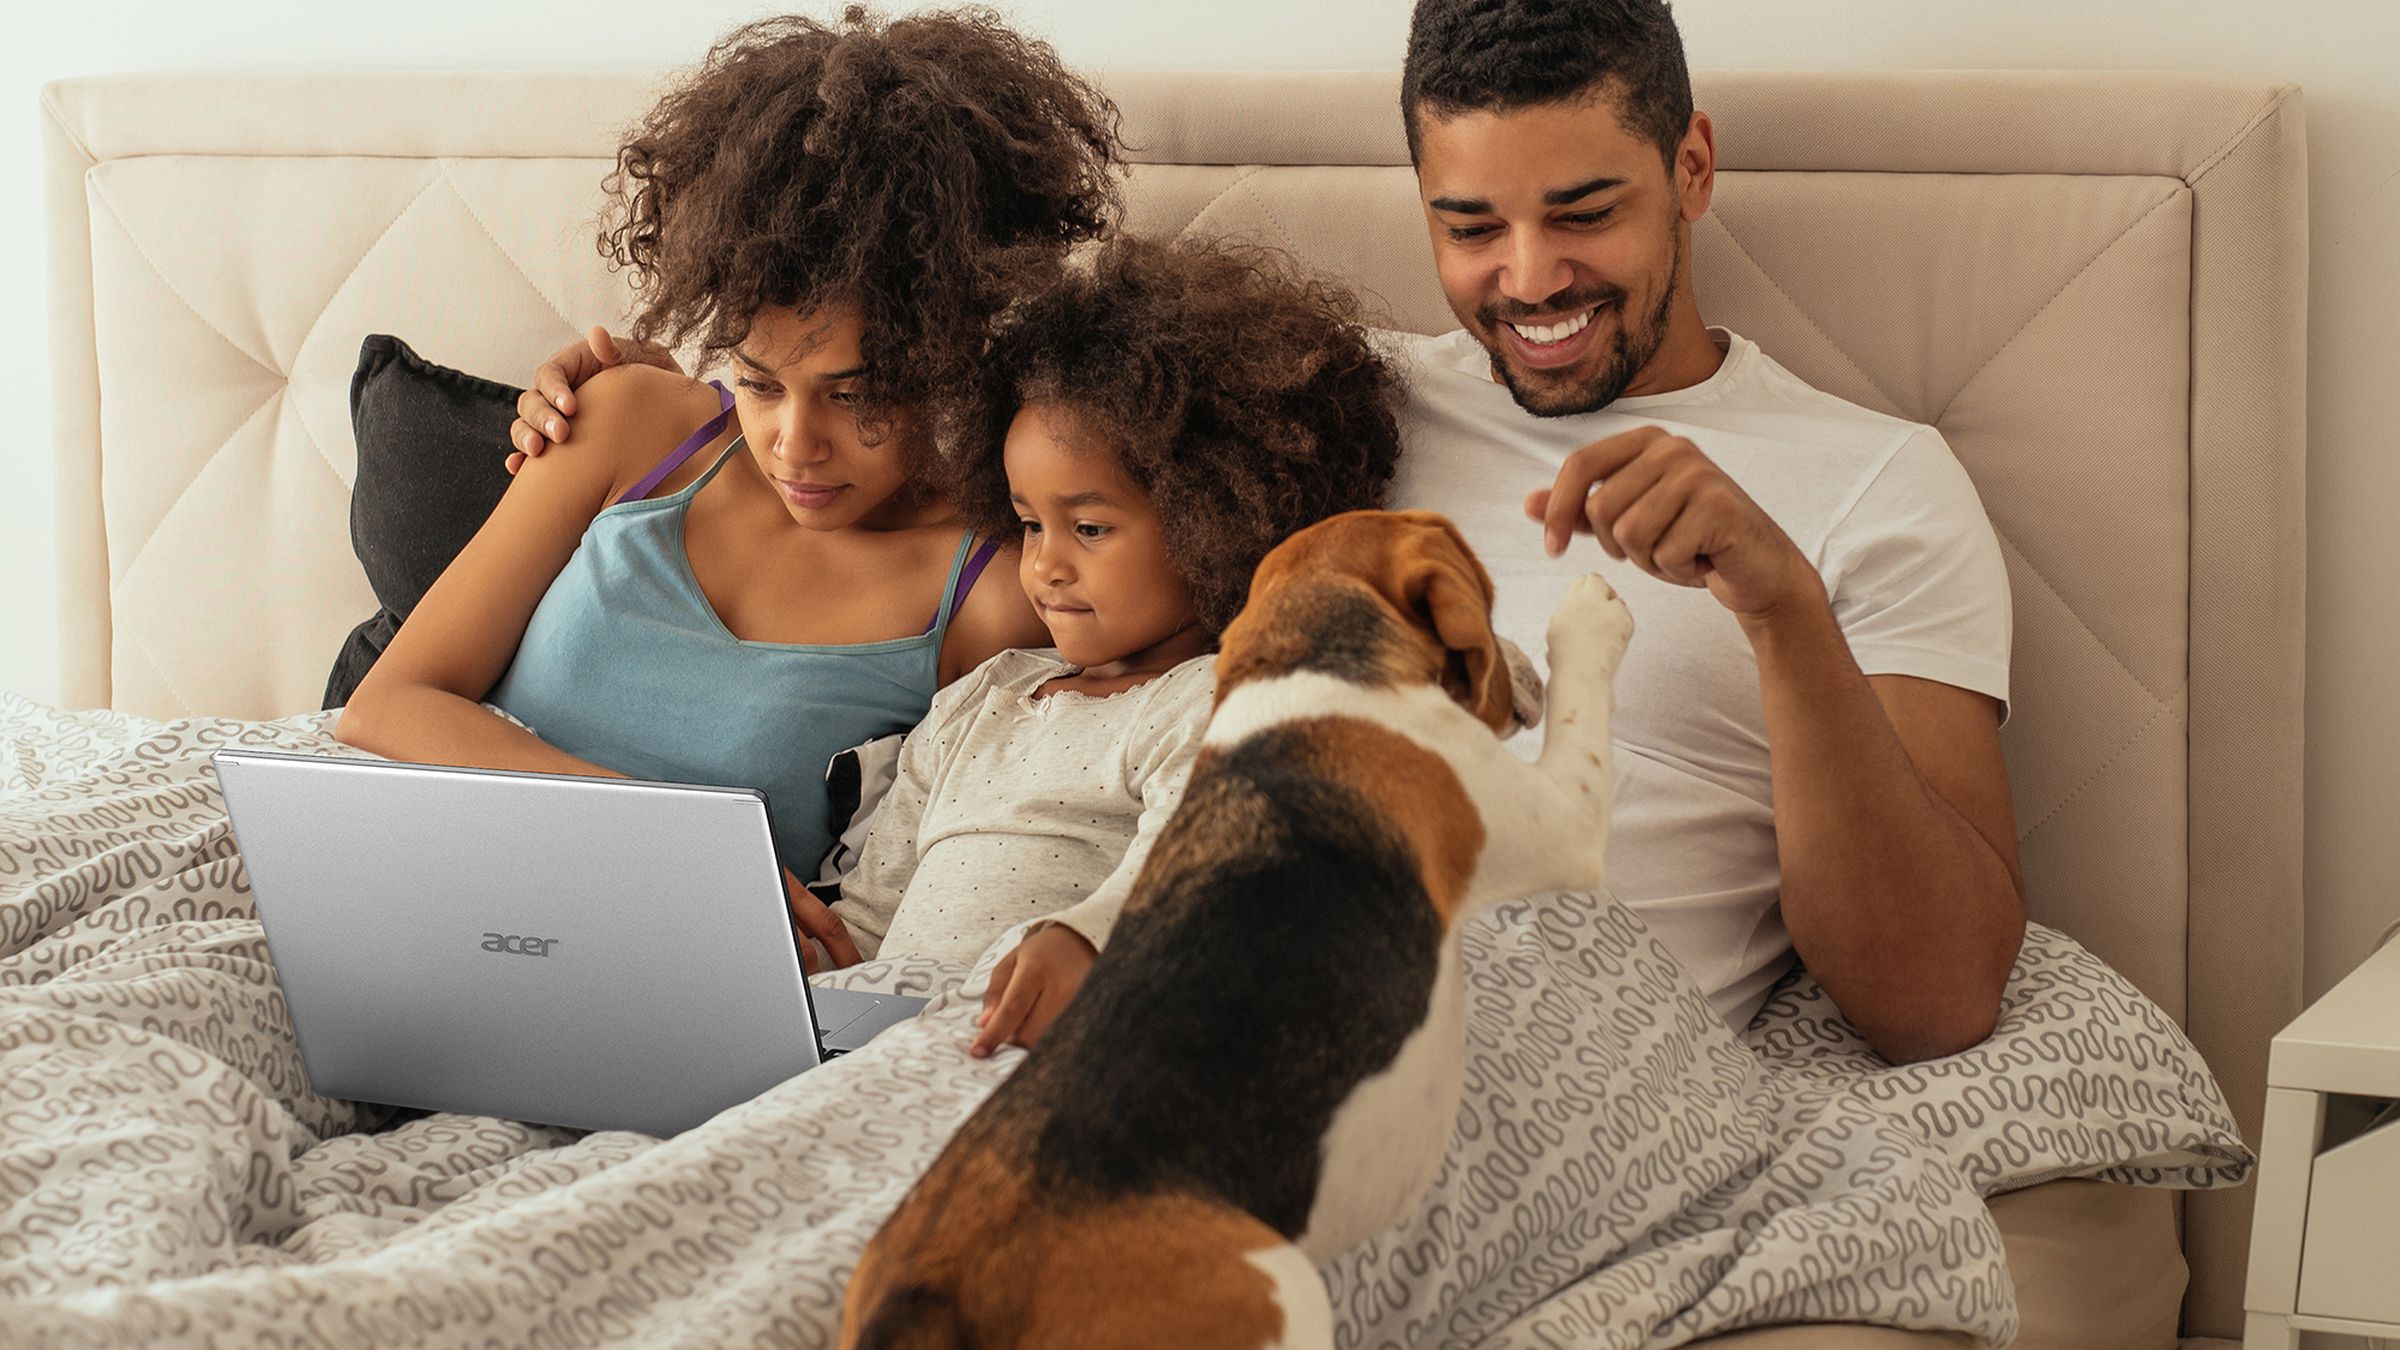 Two parents and a young child watch content on the Acer Aspire 5 in a bed. A dog paws one of the members.